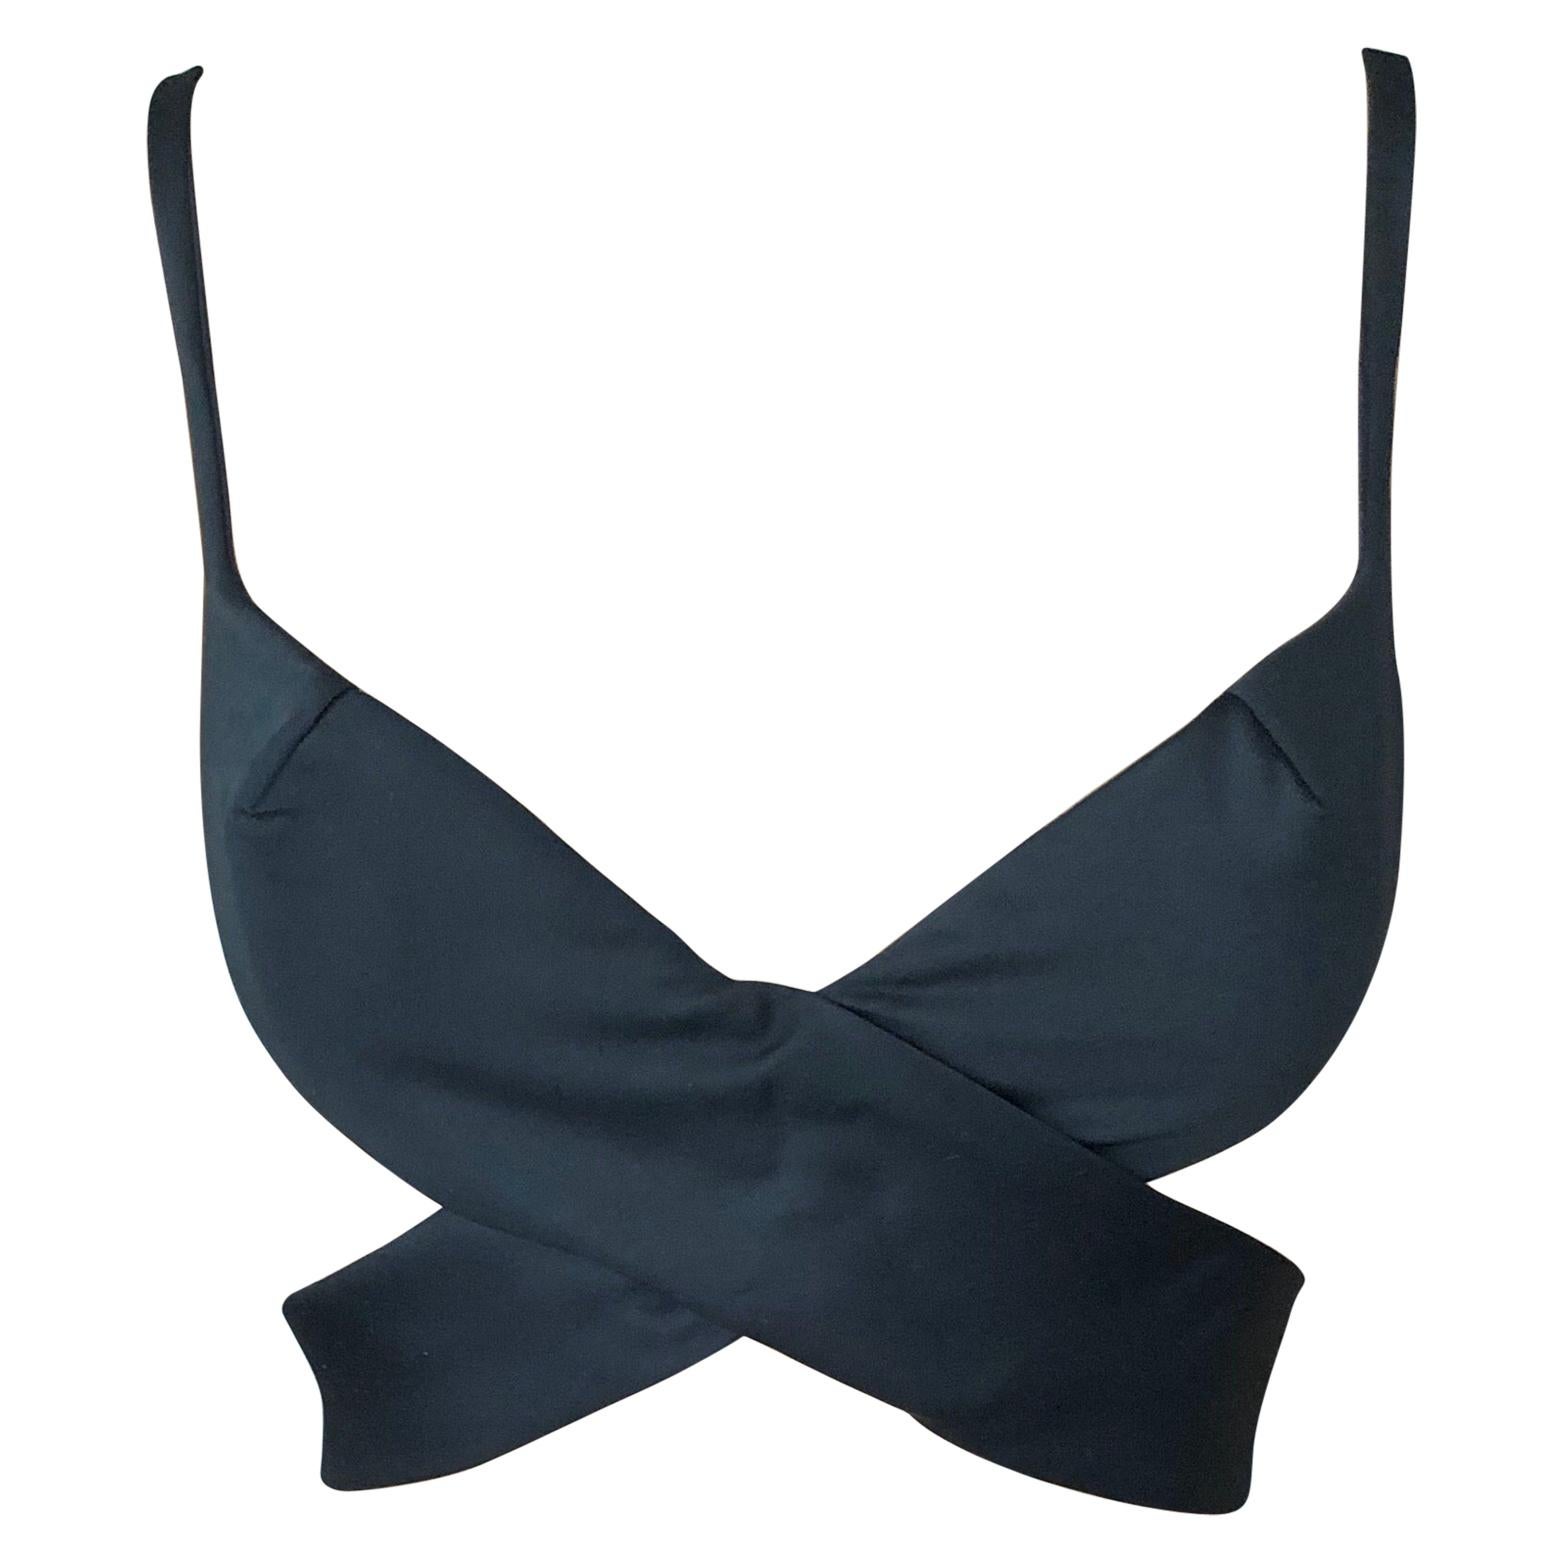 Tom Ford for Gucci S/S 2001 Runway Cutout Black Bustier Bra Crop Top